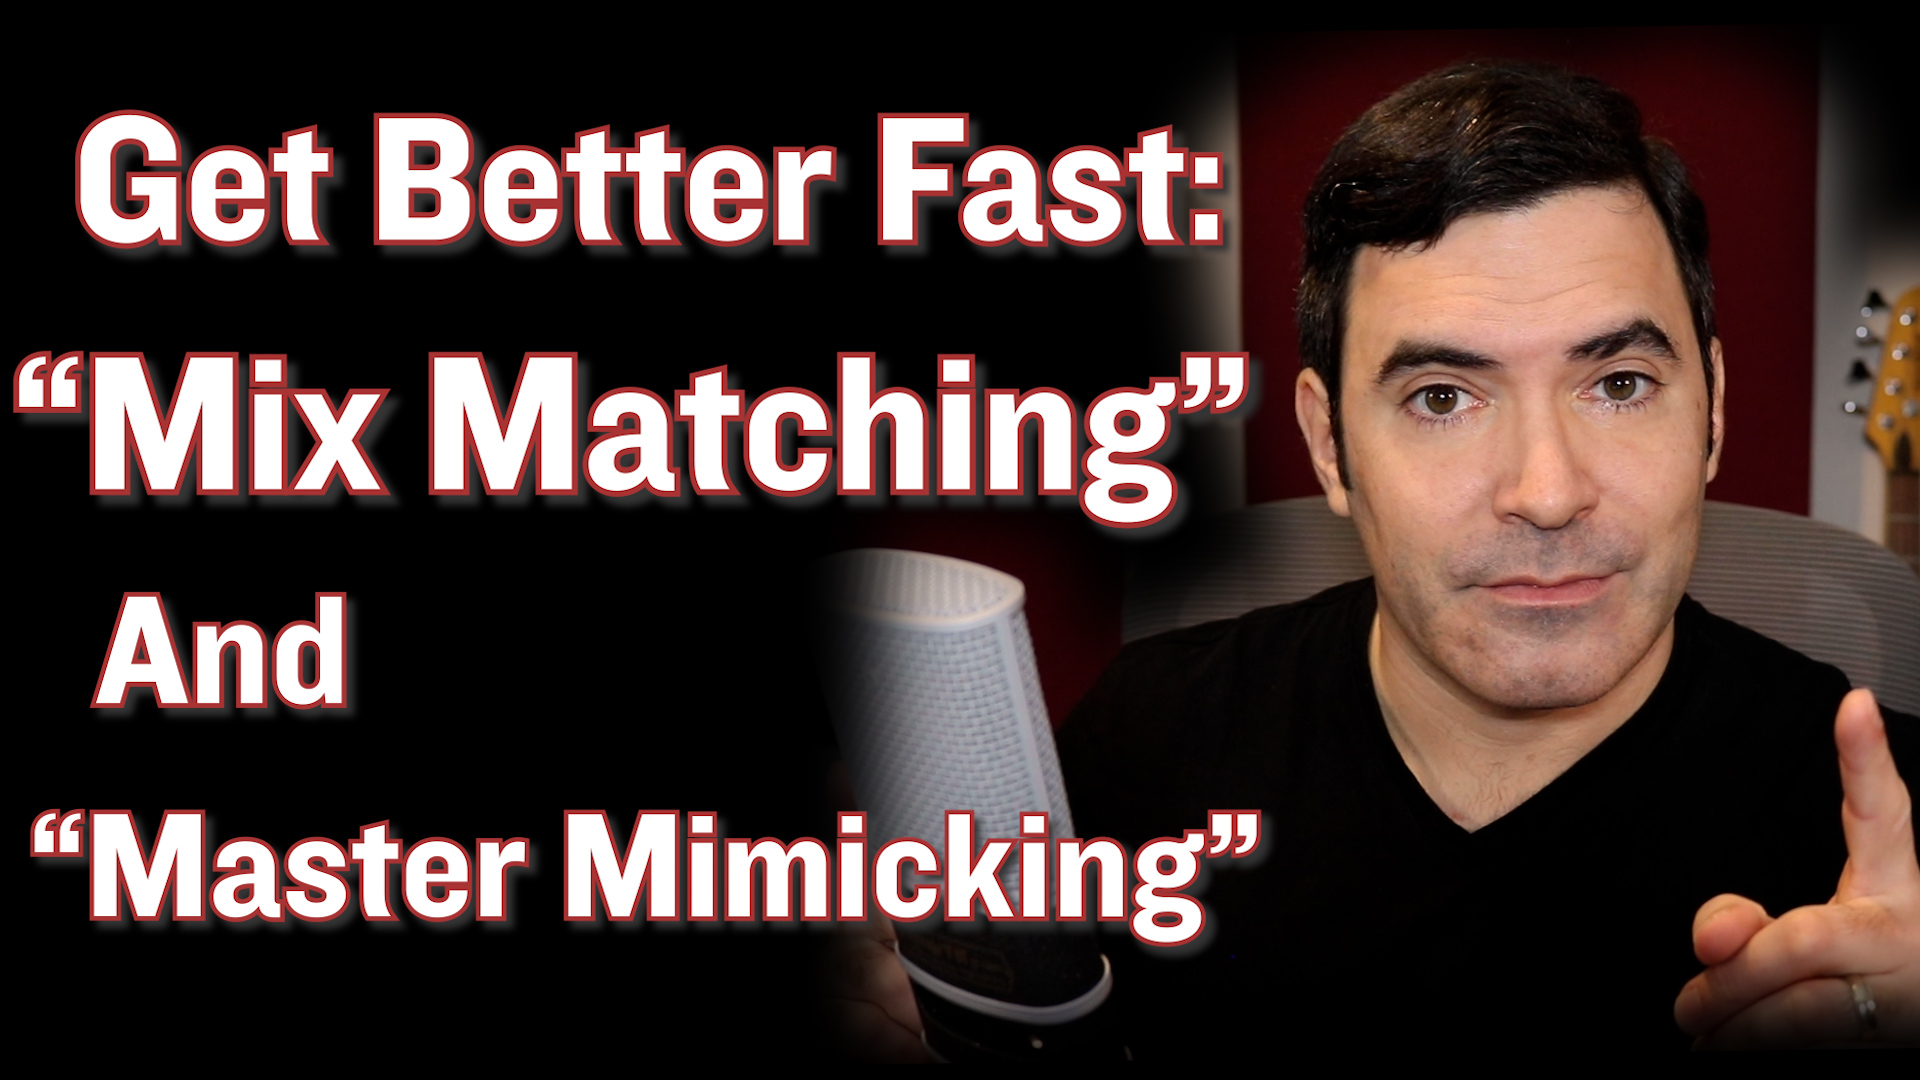 “Mix Matching” and “Master Mimicking” (The best ways to get better, fast)